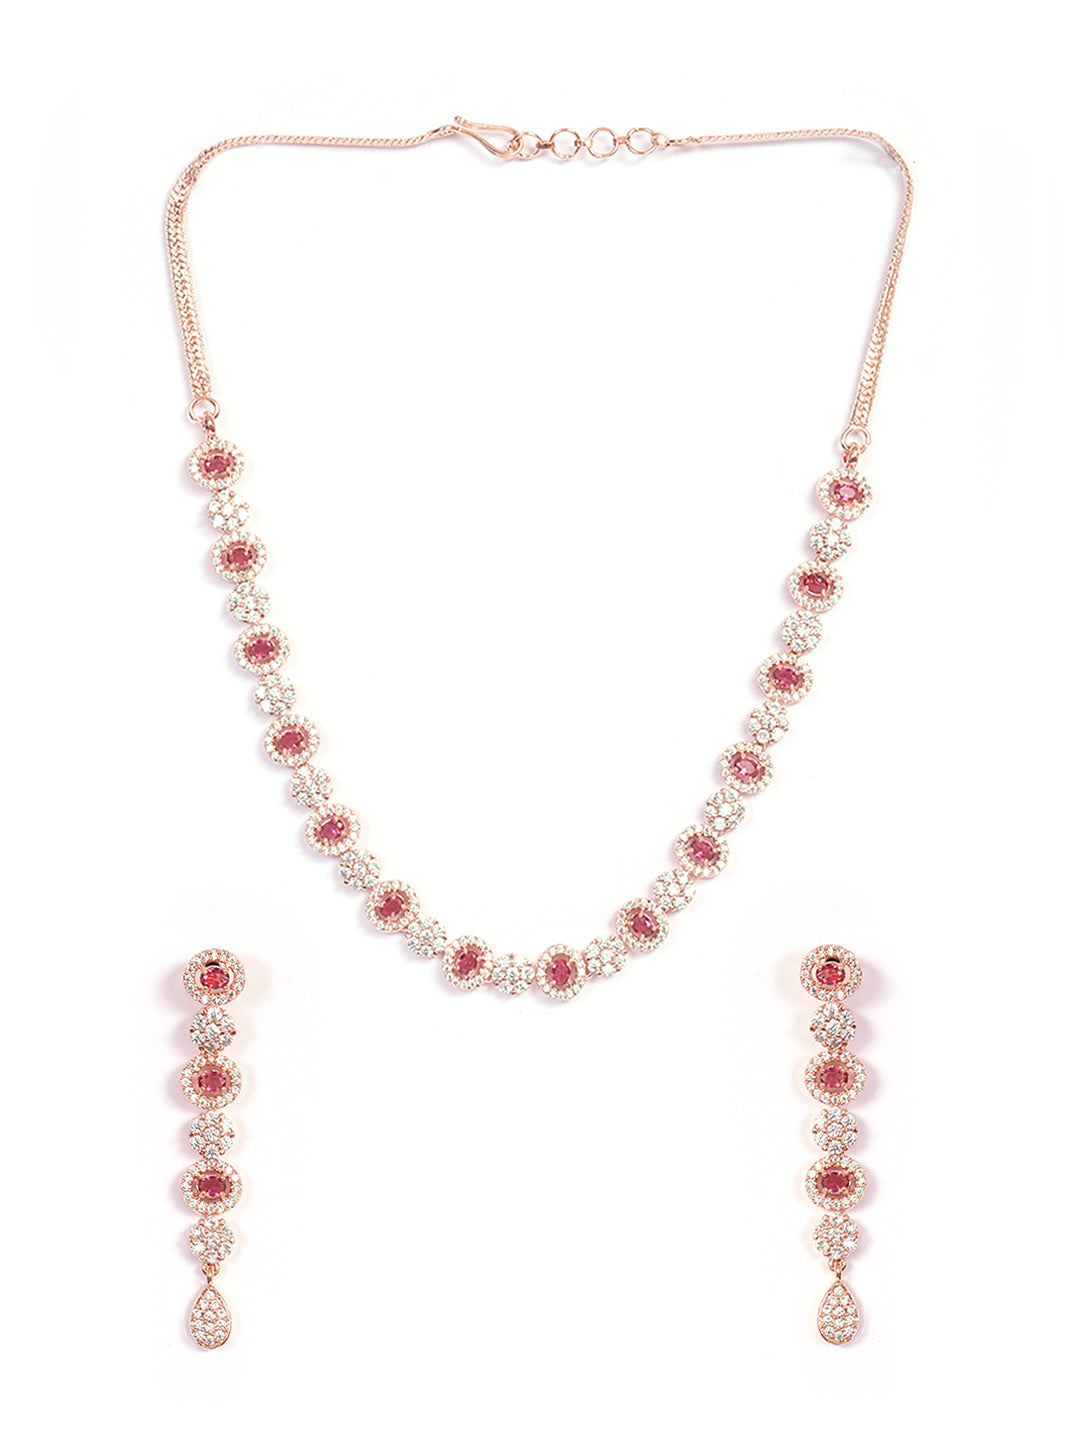 Premium Rose Gold Plated with sparkling Red and White CZ stones designer Necklace Set 8945N